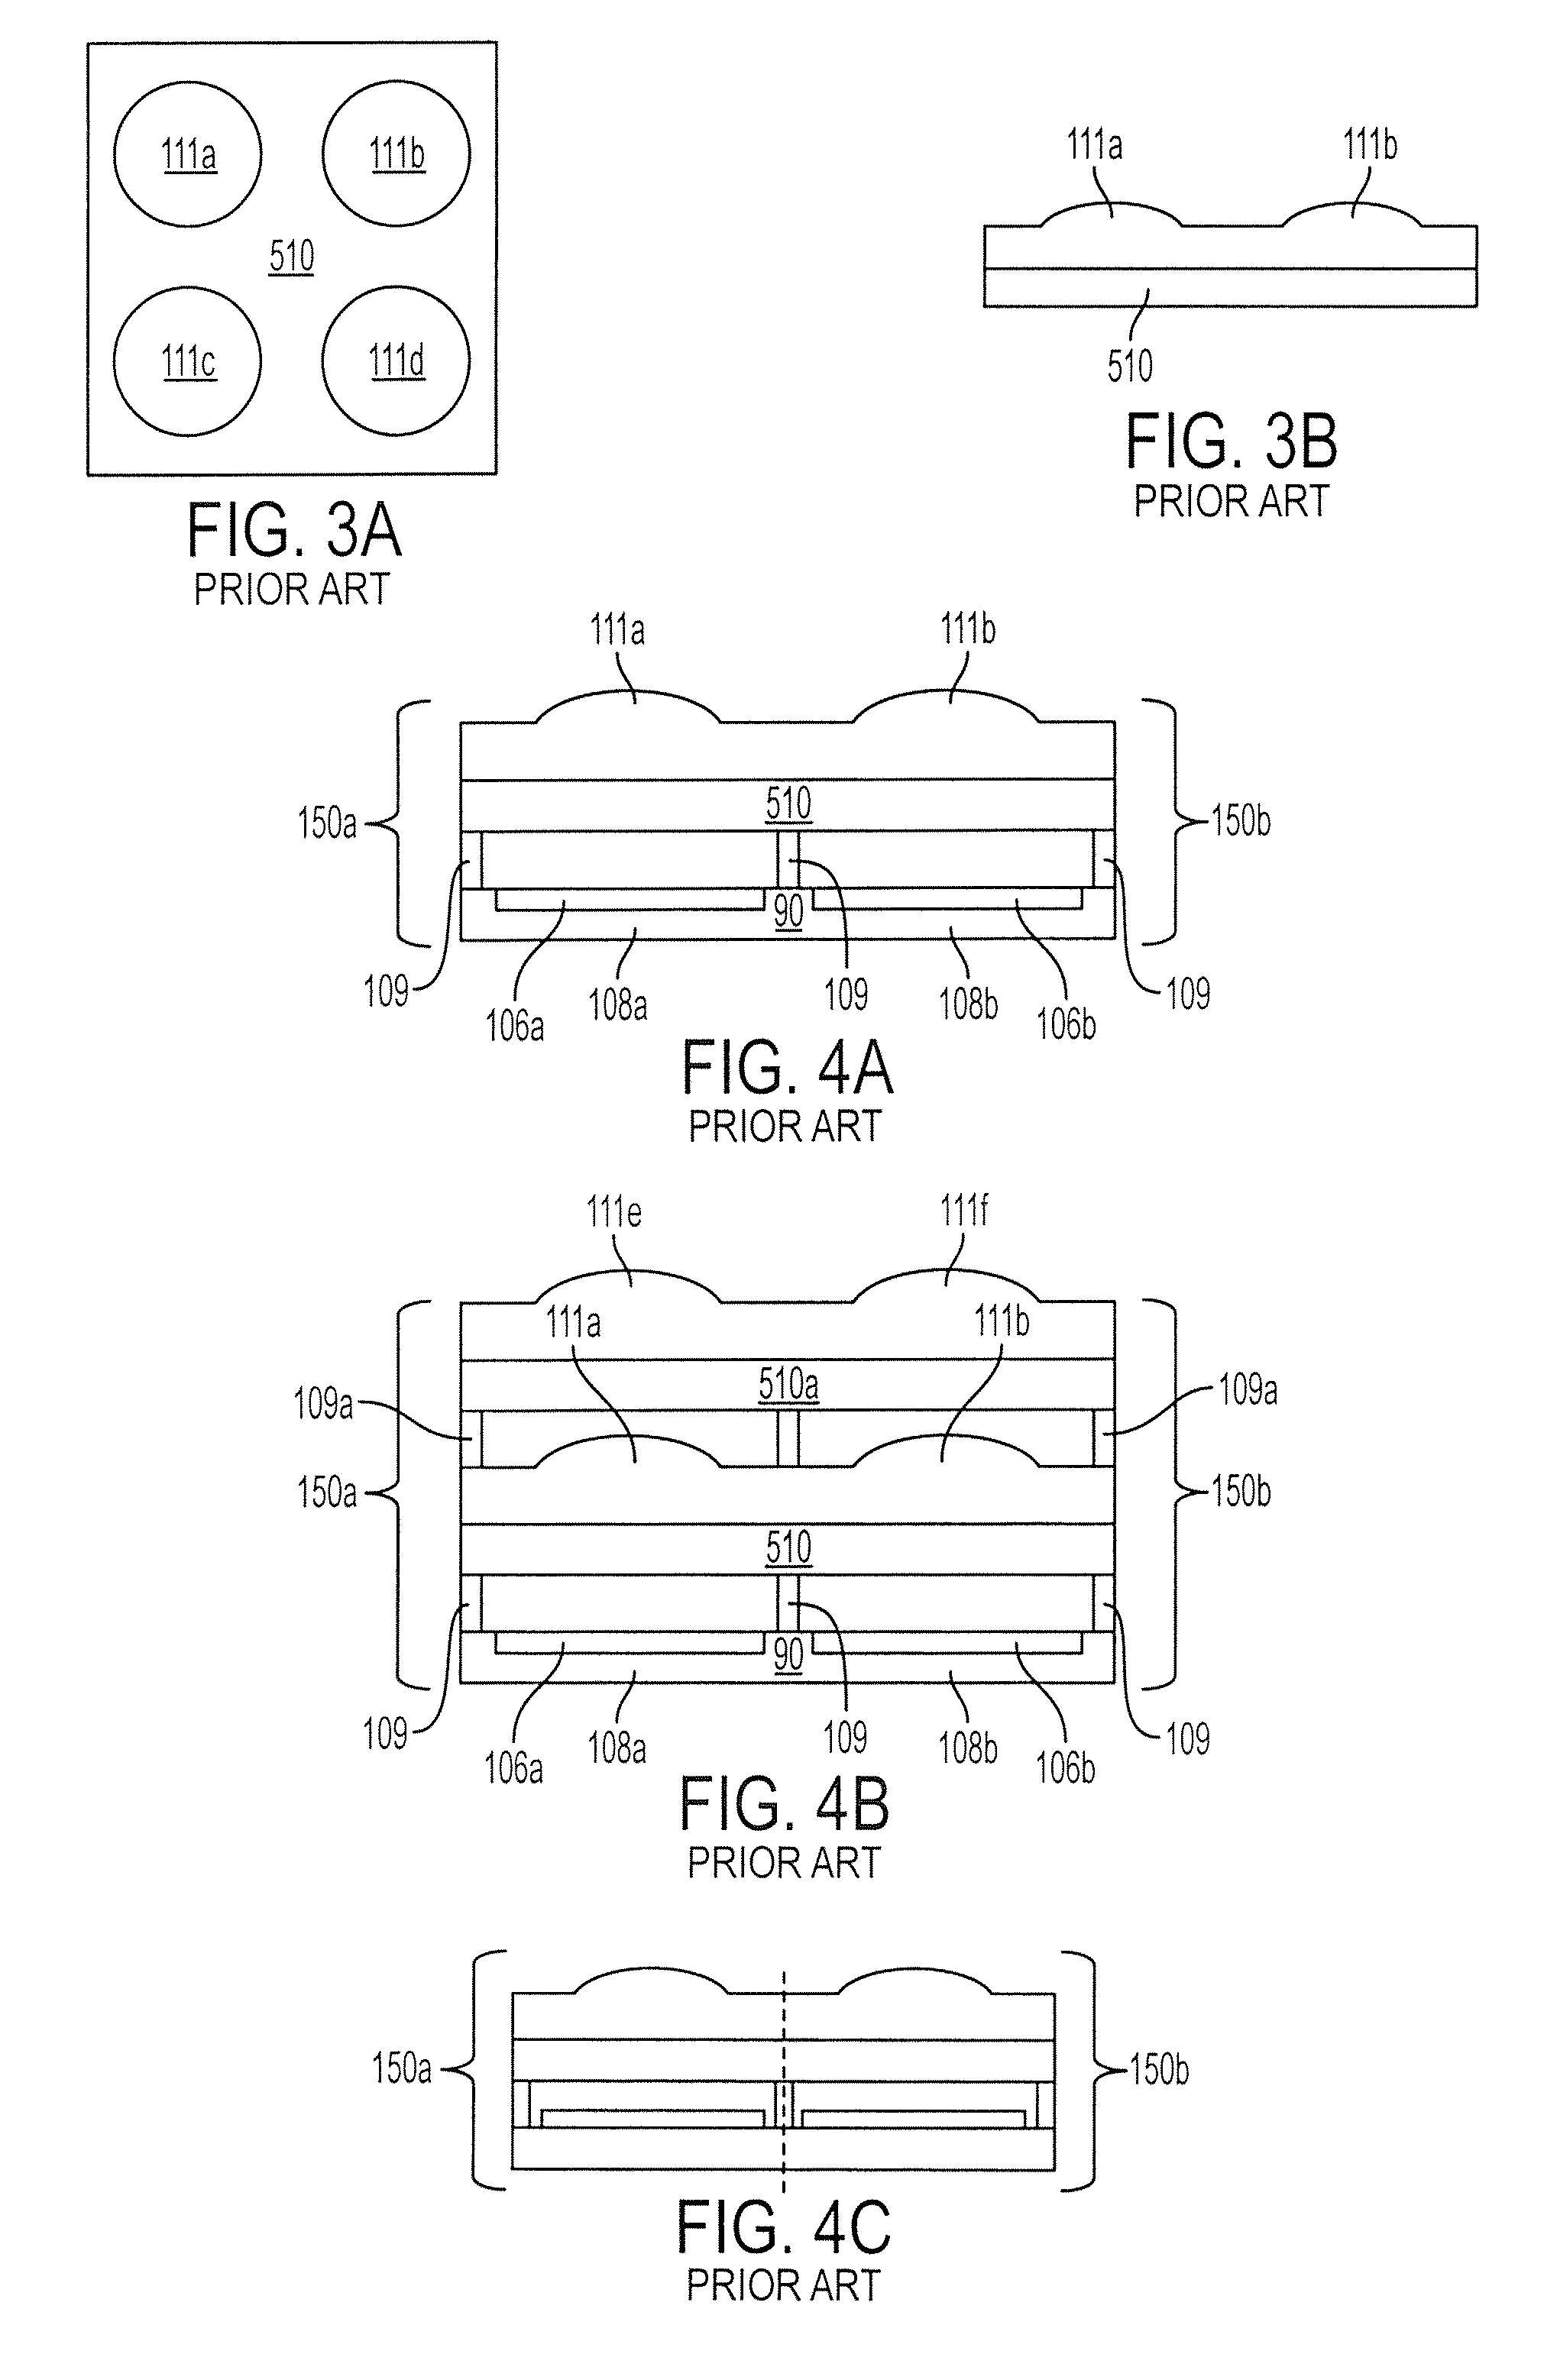 Method and apparatus providing combined spacer and optical lens element